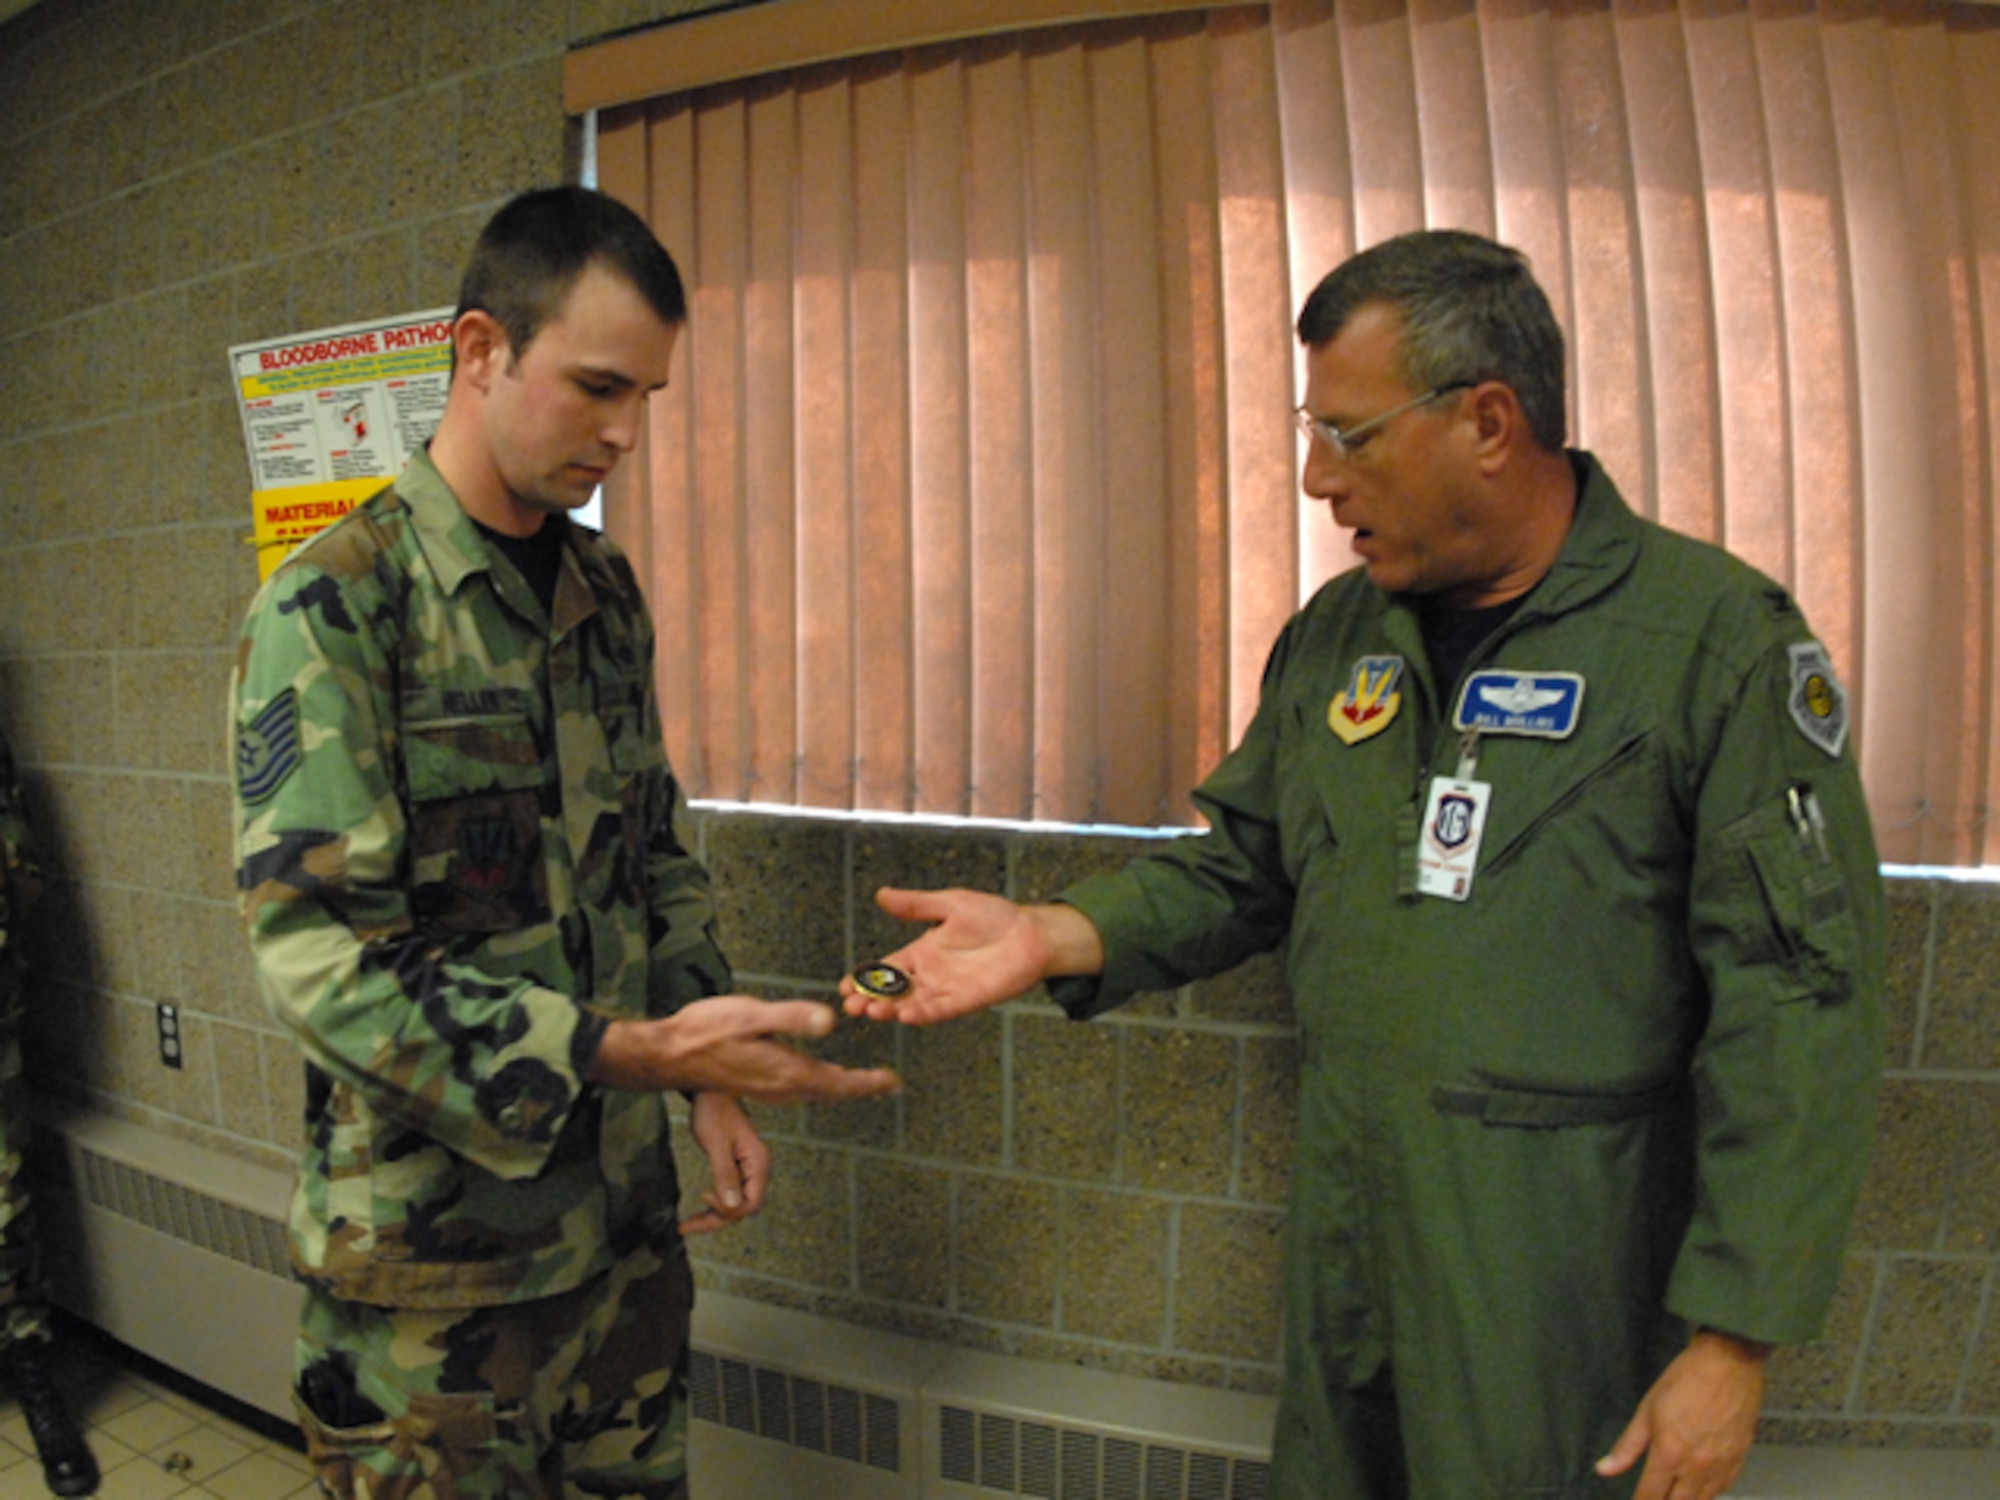 U.S. Air Force Col. William Mullins, right, presents a special unit compliance inspection coin to Tech. Sgt. Levi J. Heller, of the 119th Security Forces Squadron, in recognition of the outstanding work he has done in the combat arms training and maintenance area of the North Dakota Air National Guard. Heller is responsible for procuring, storing and tracking weapons parts for all weapon systems on the installation, which was reported as ‘the best seen to date’ by the unit compliance inspection team.